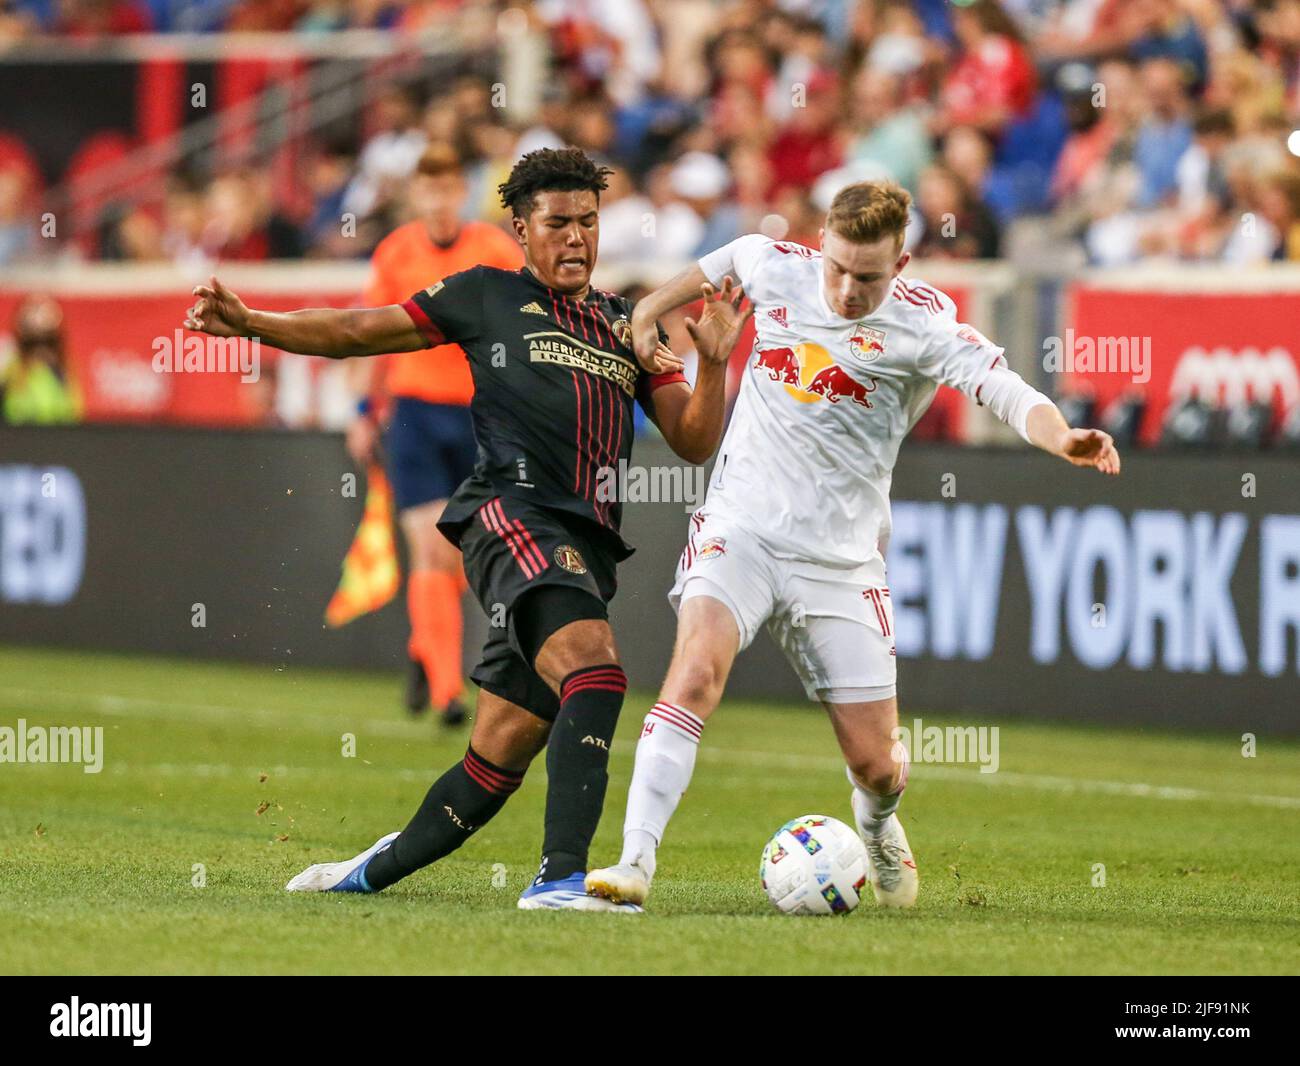 Harrison, NJ, USA. 30th June, 2022. Atlanta United defender Caleb Wiley (26) and New York Red Bulls forward Cameron Harper (17) battle for the ball during a MLS game between the Atlanta United FC and the New York Red Bulls at Red Bull Arena in Harrison, NJ. New York defeated Atlanta 2-1. Mike Langish/Cal Sport Media. Credit: csm/Alamy Live News Stock Photo